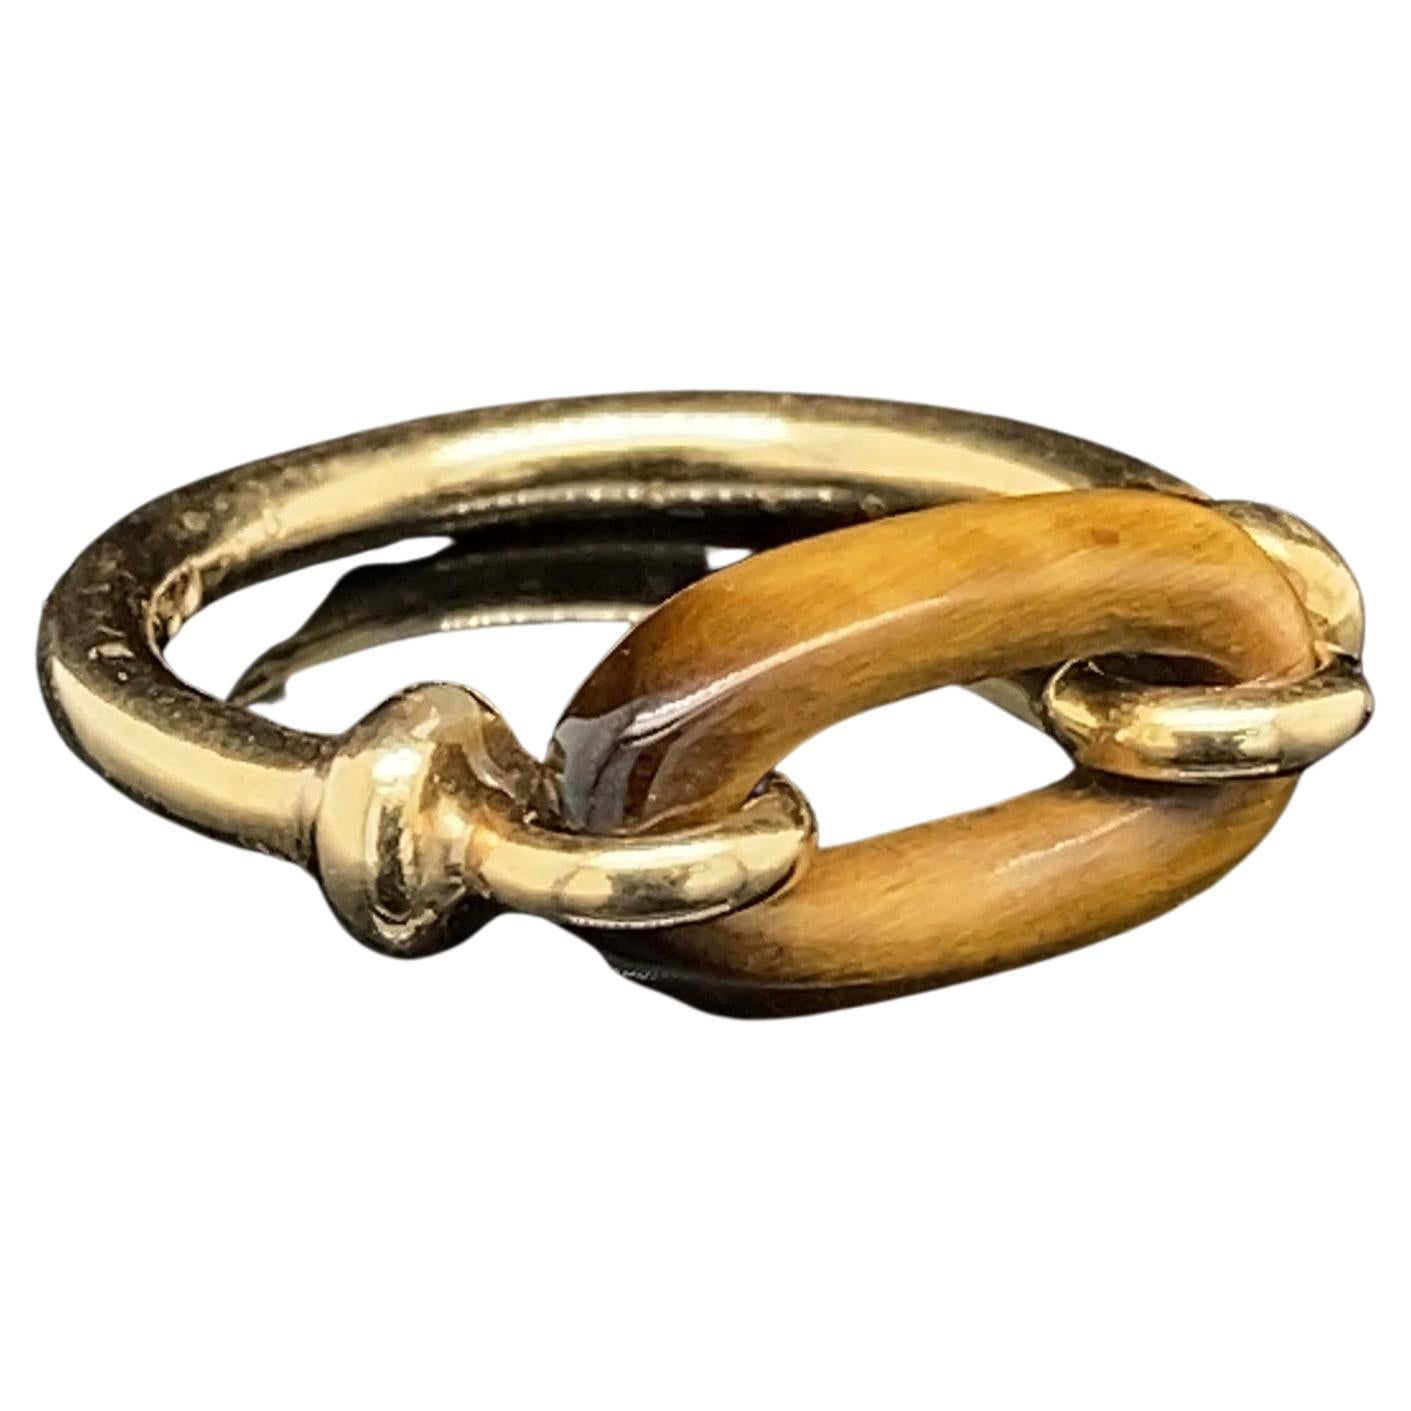 Rare Cartier 18k Gold and Tiger's Eye Ring